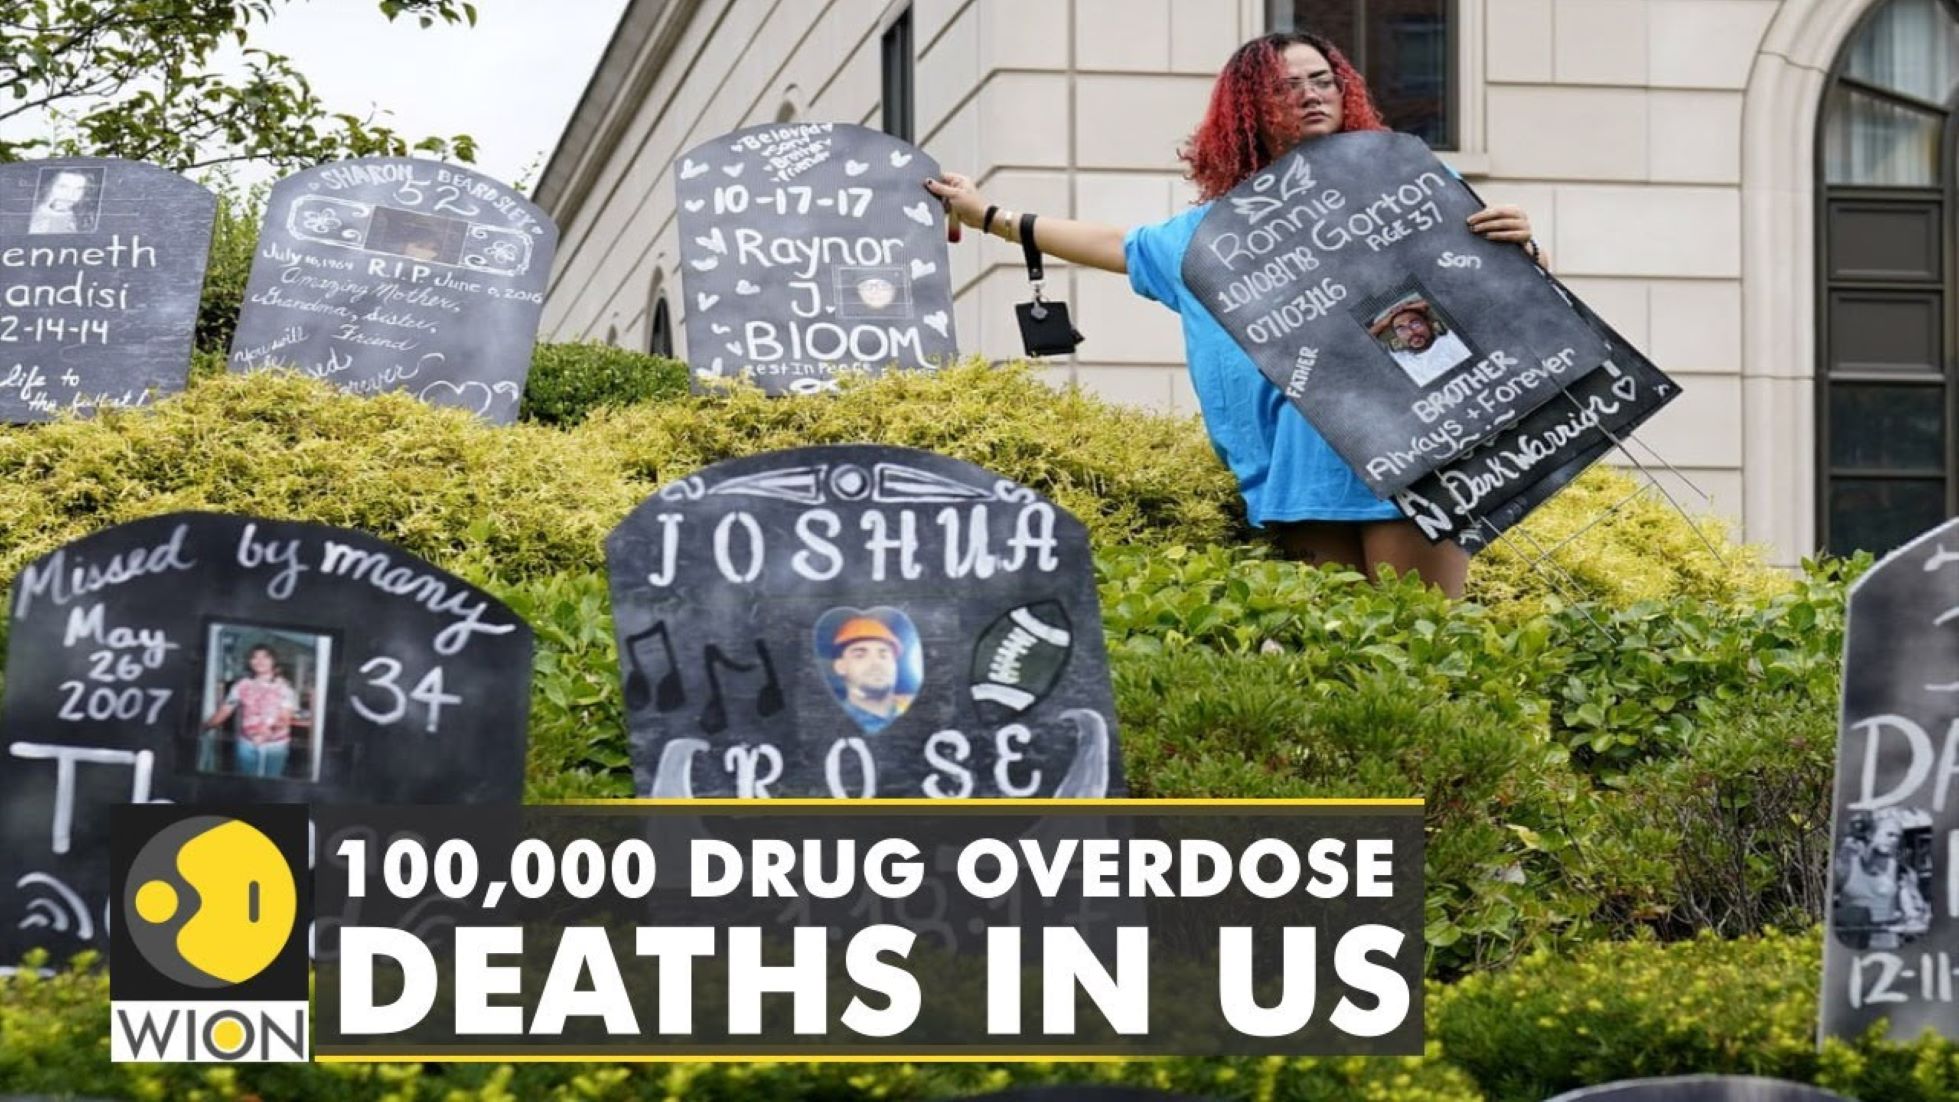 Over 100,000 Americans Died From Drug Overdoses Last Year